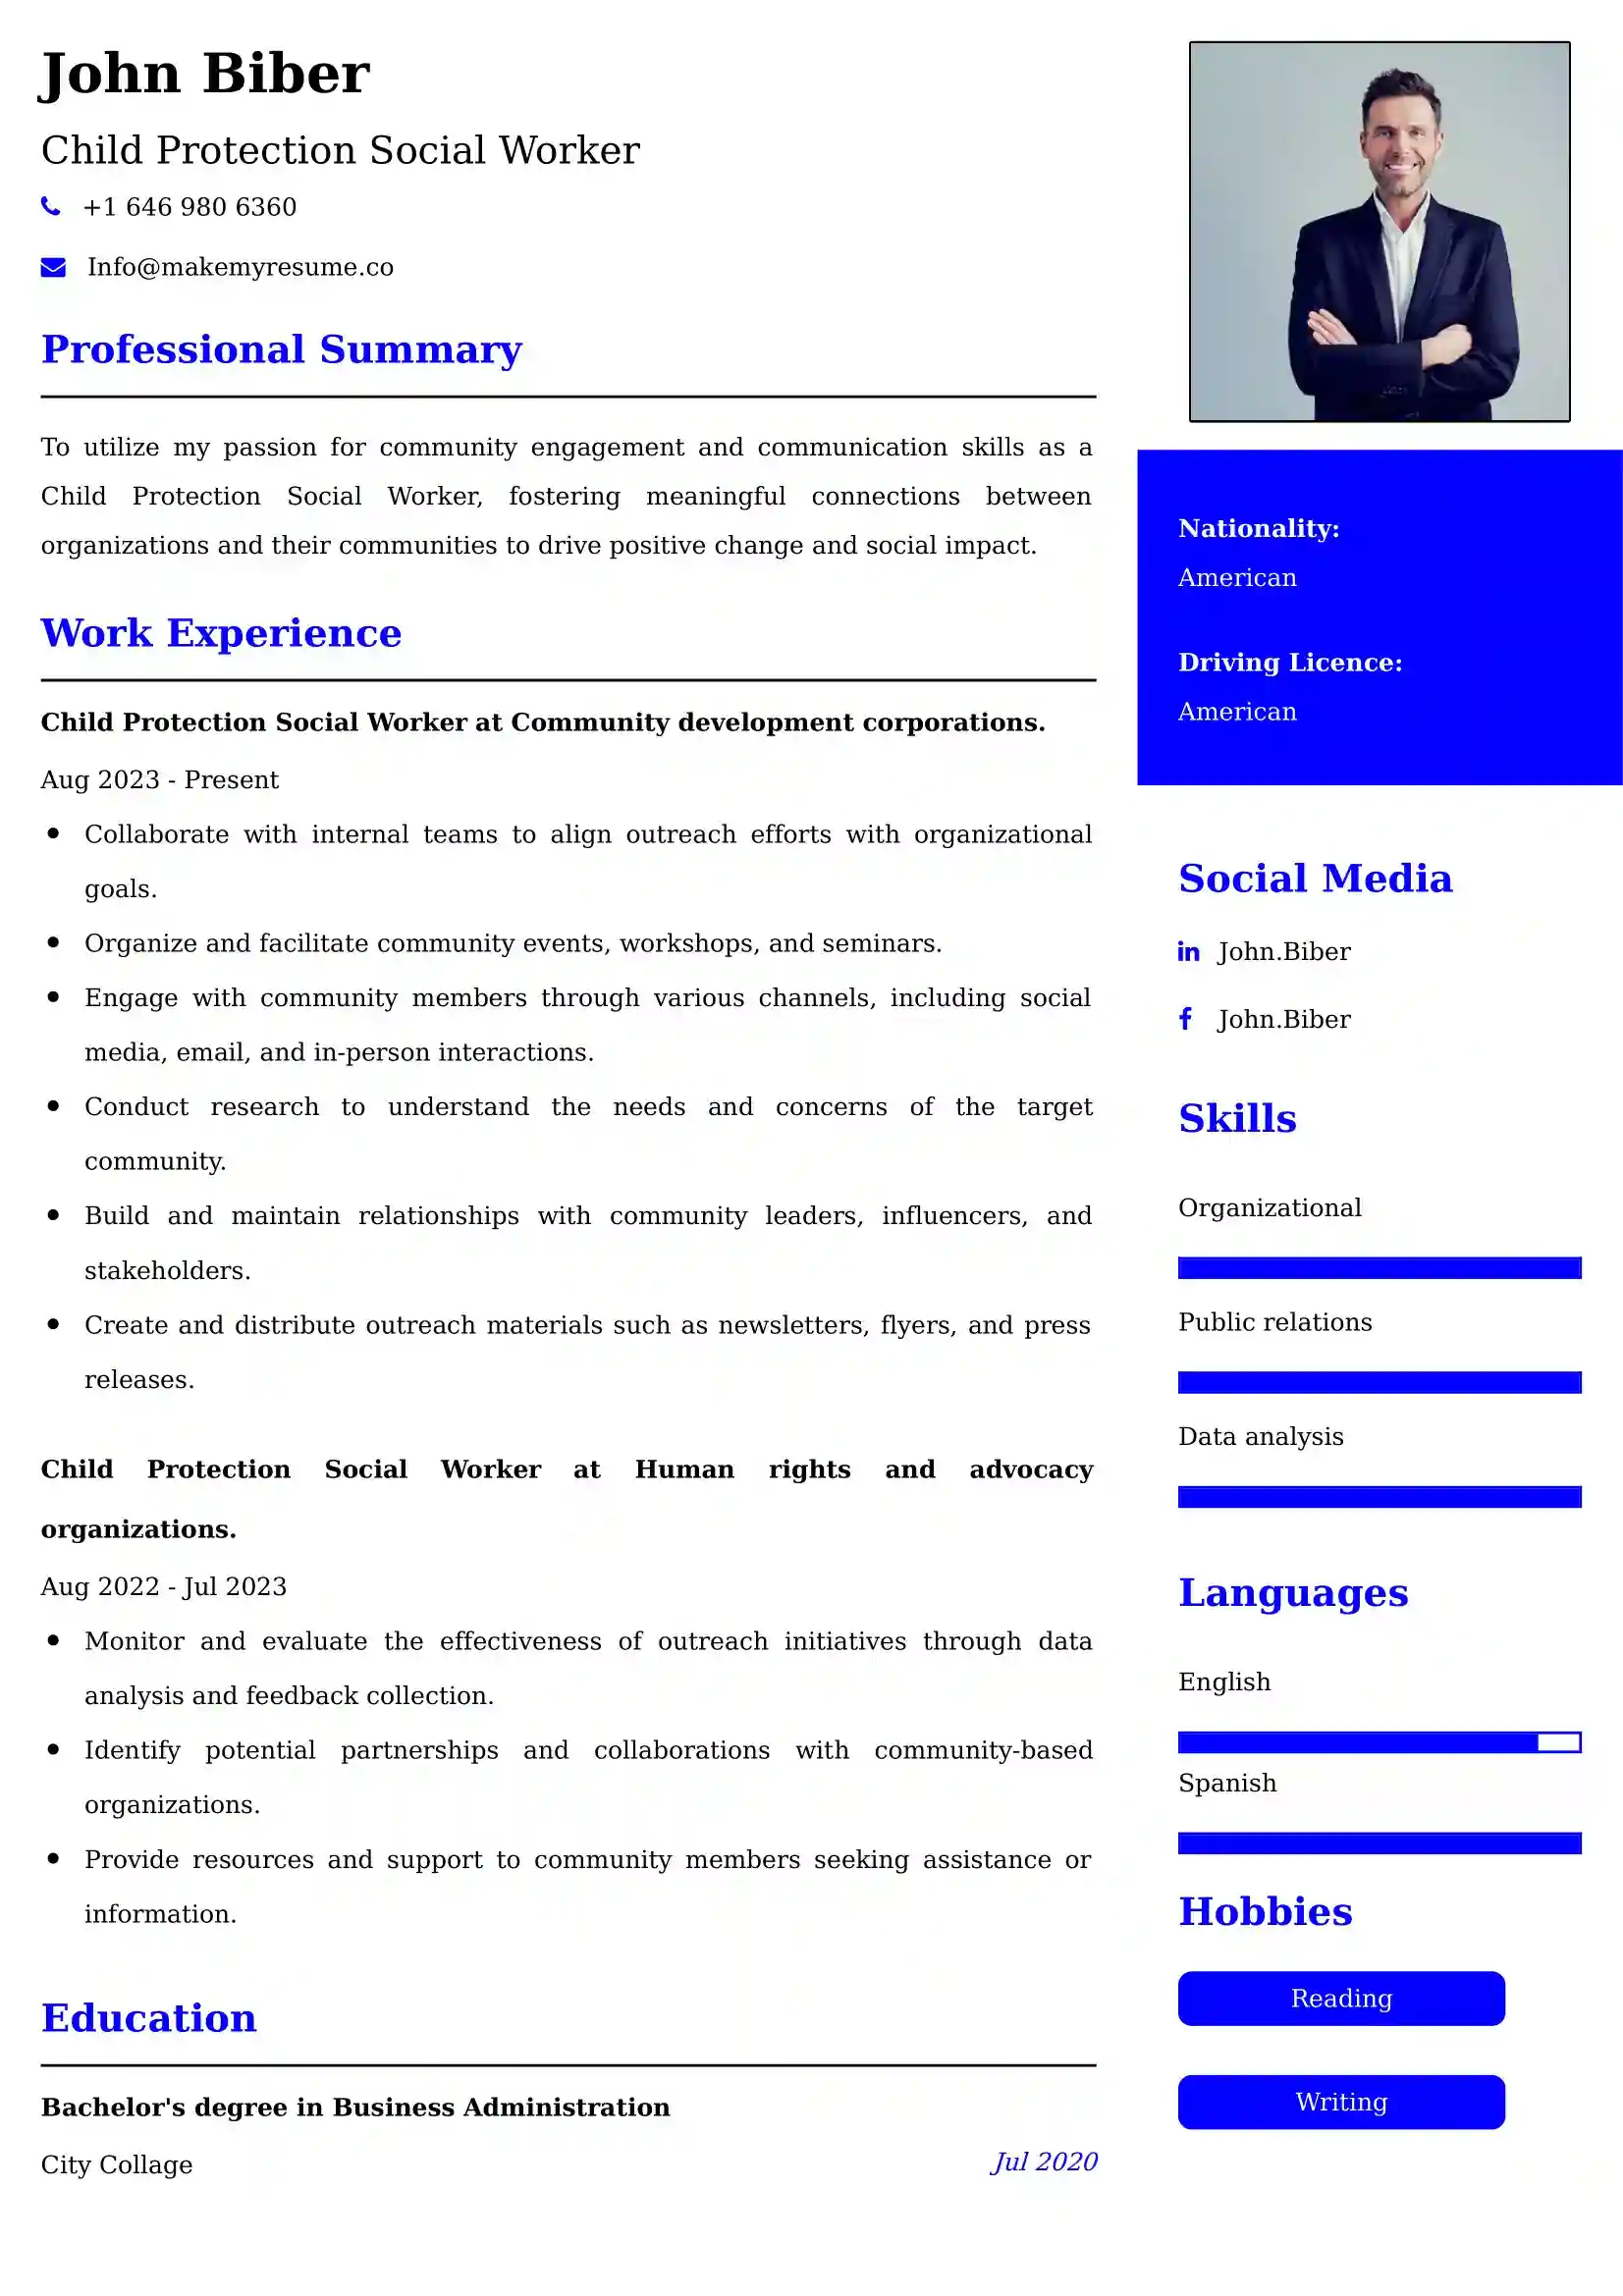 Child Protection Social Worker Resume Examples - Brazilian Format, Latest Template